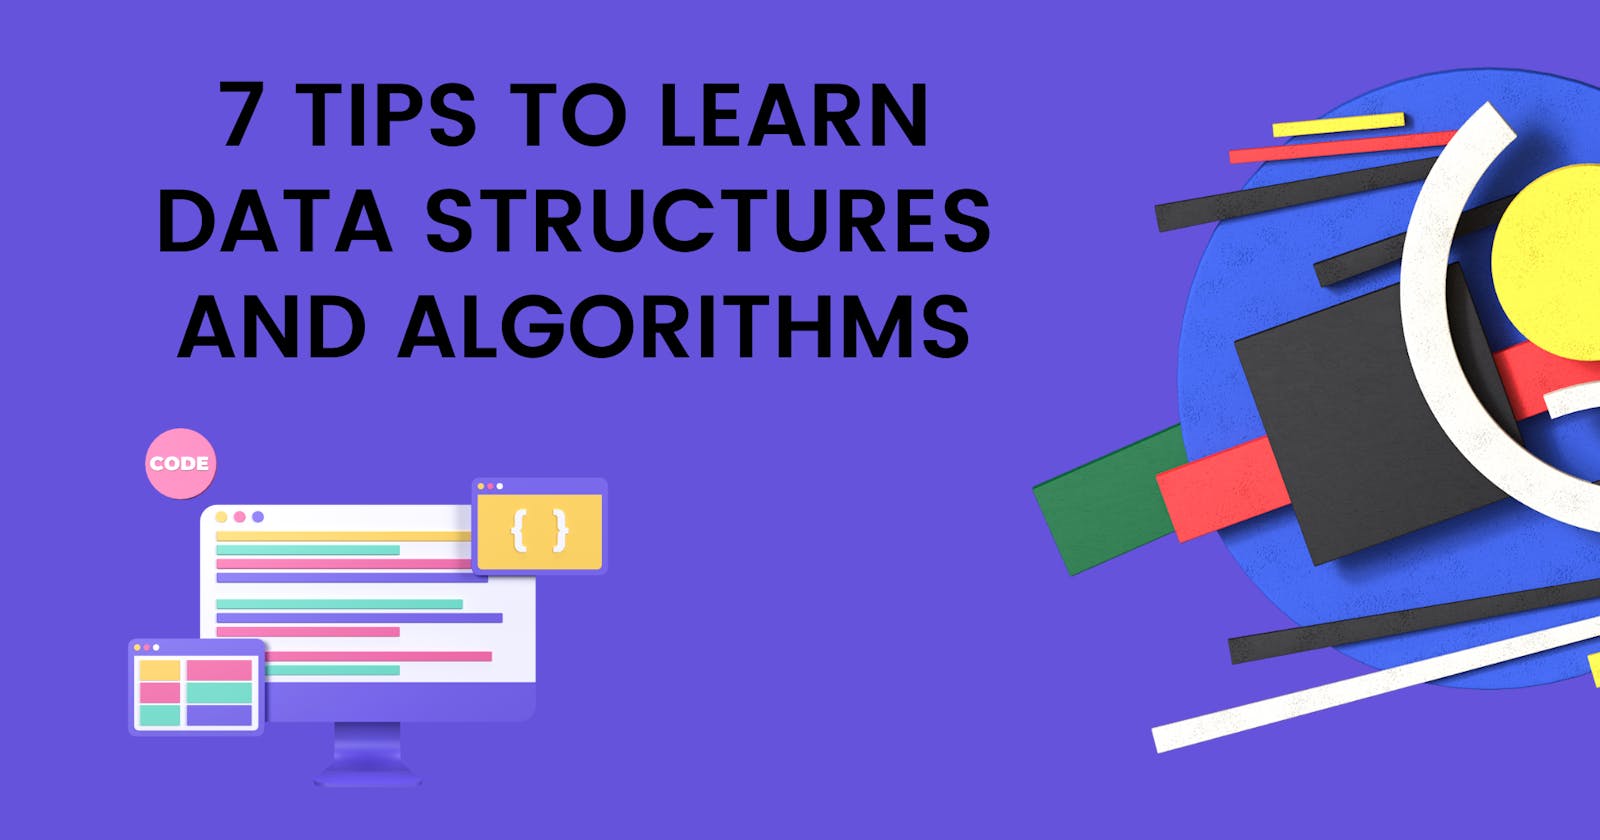 7 tips to learn Data Structures and Algorithms?